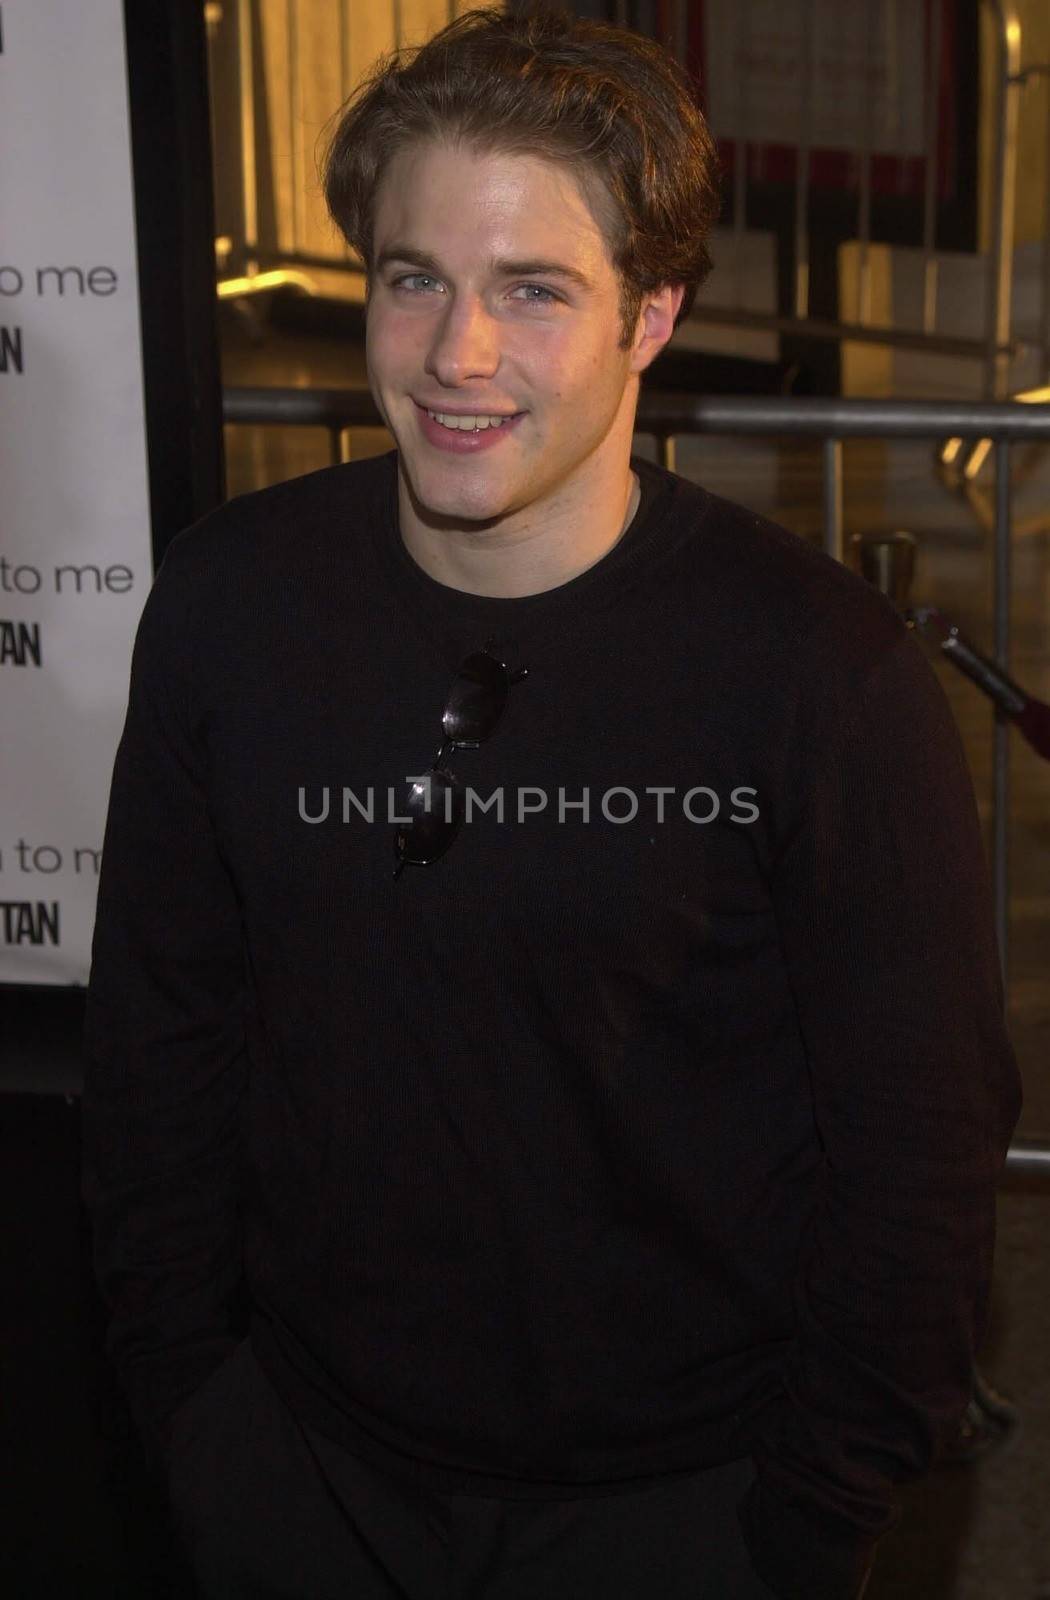 Mark Famiglietti at the premiere of MGM's "RETURN TO ME" in Century City, 04-03-00